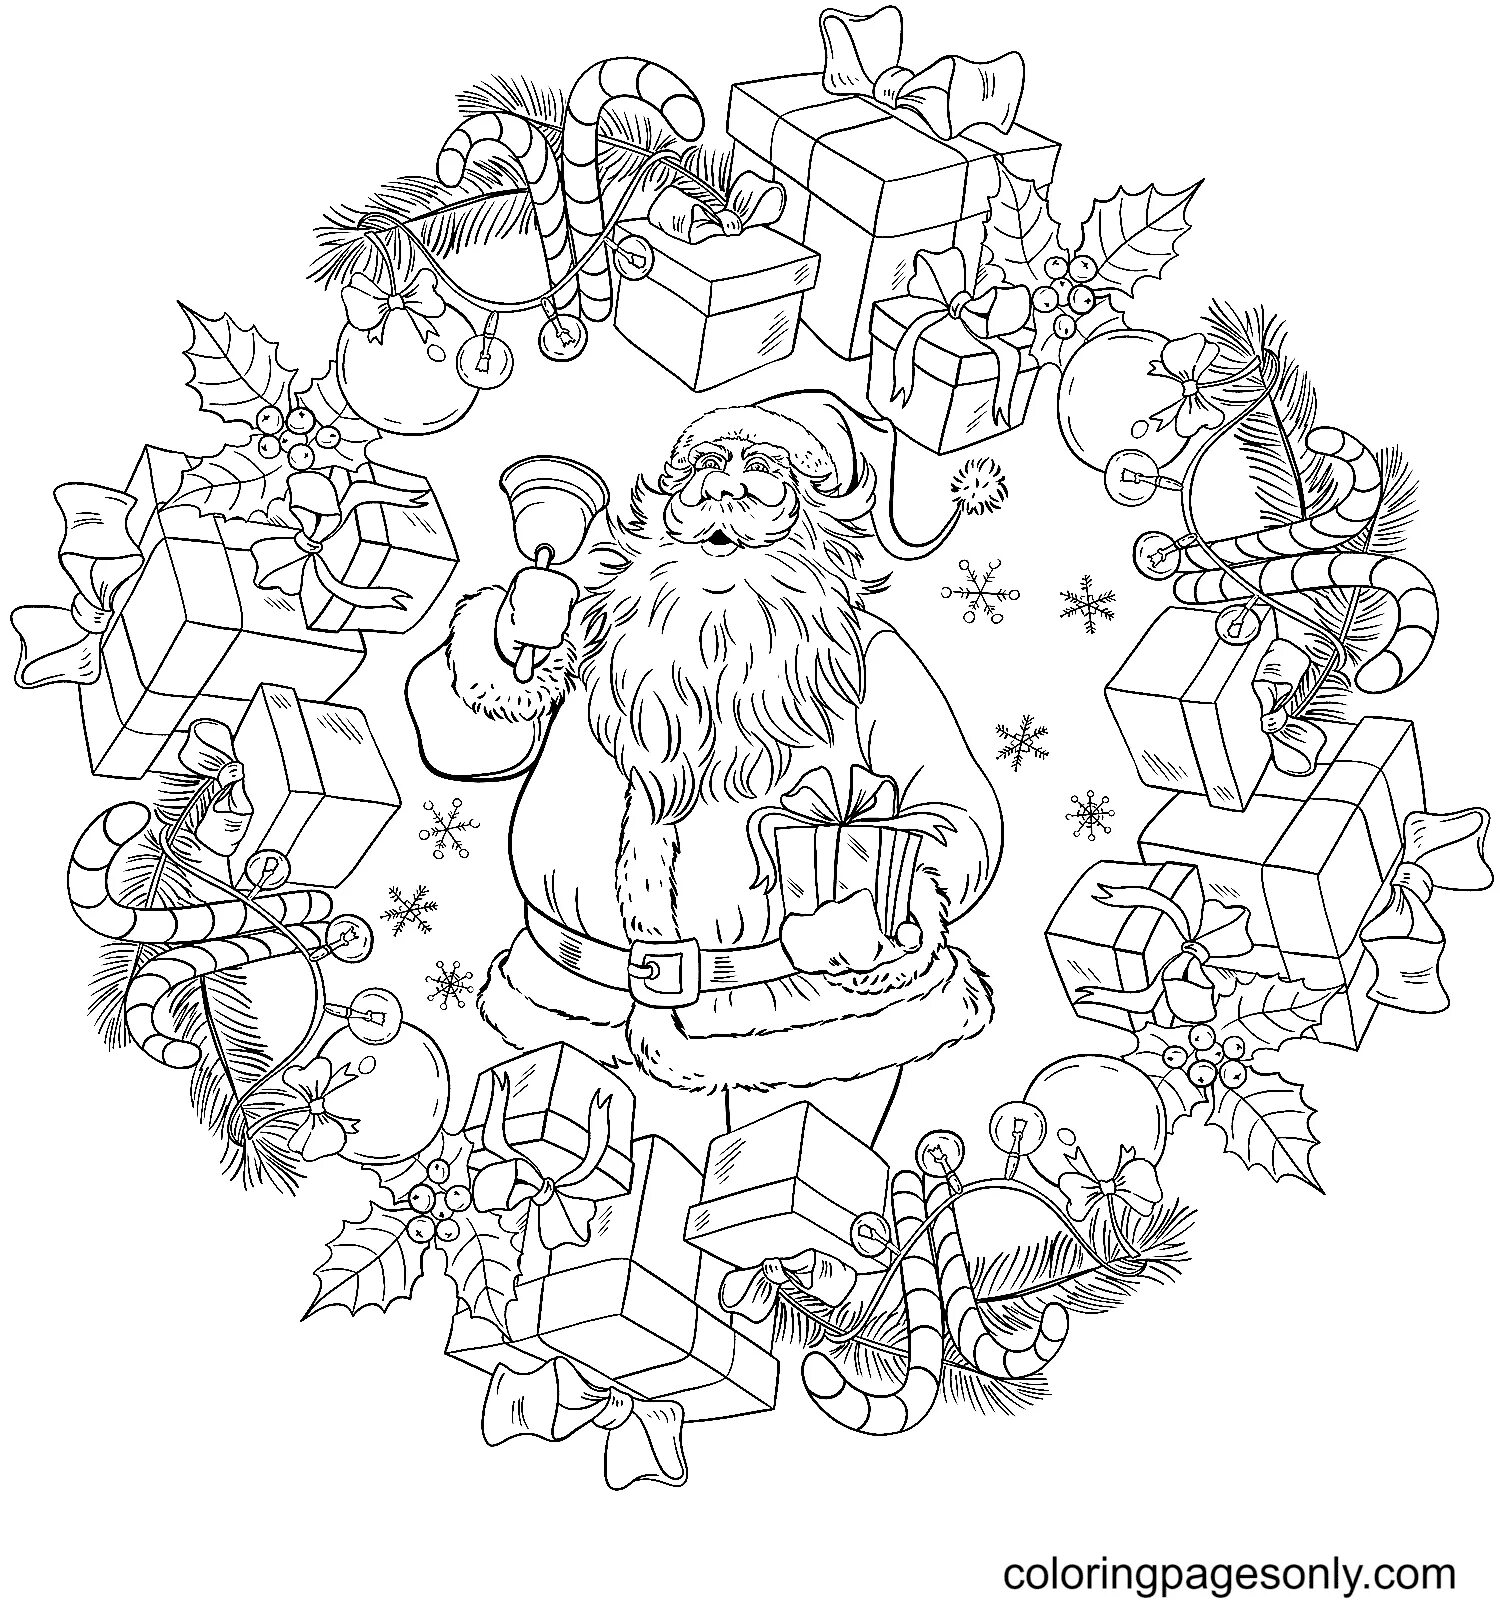 Christmas glitter antistress coloring book